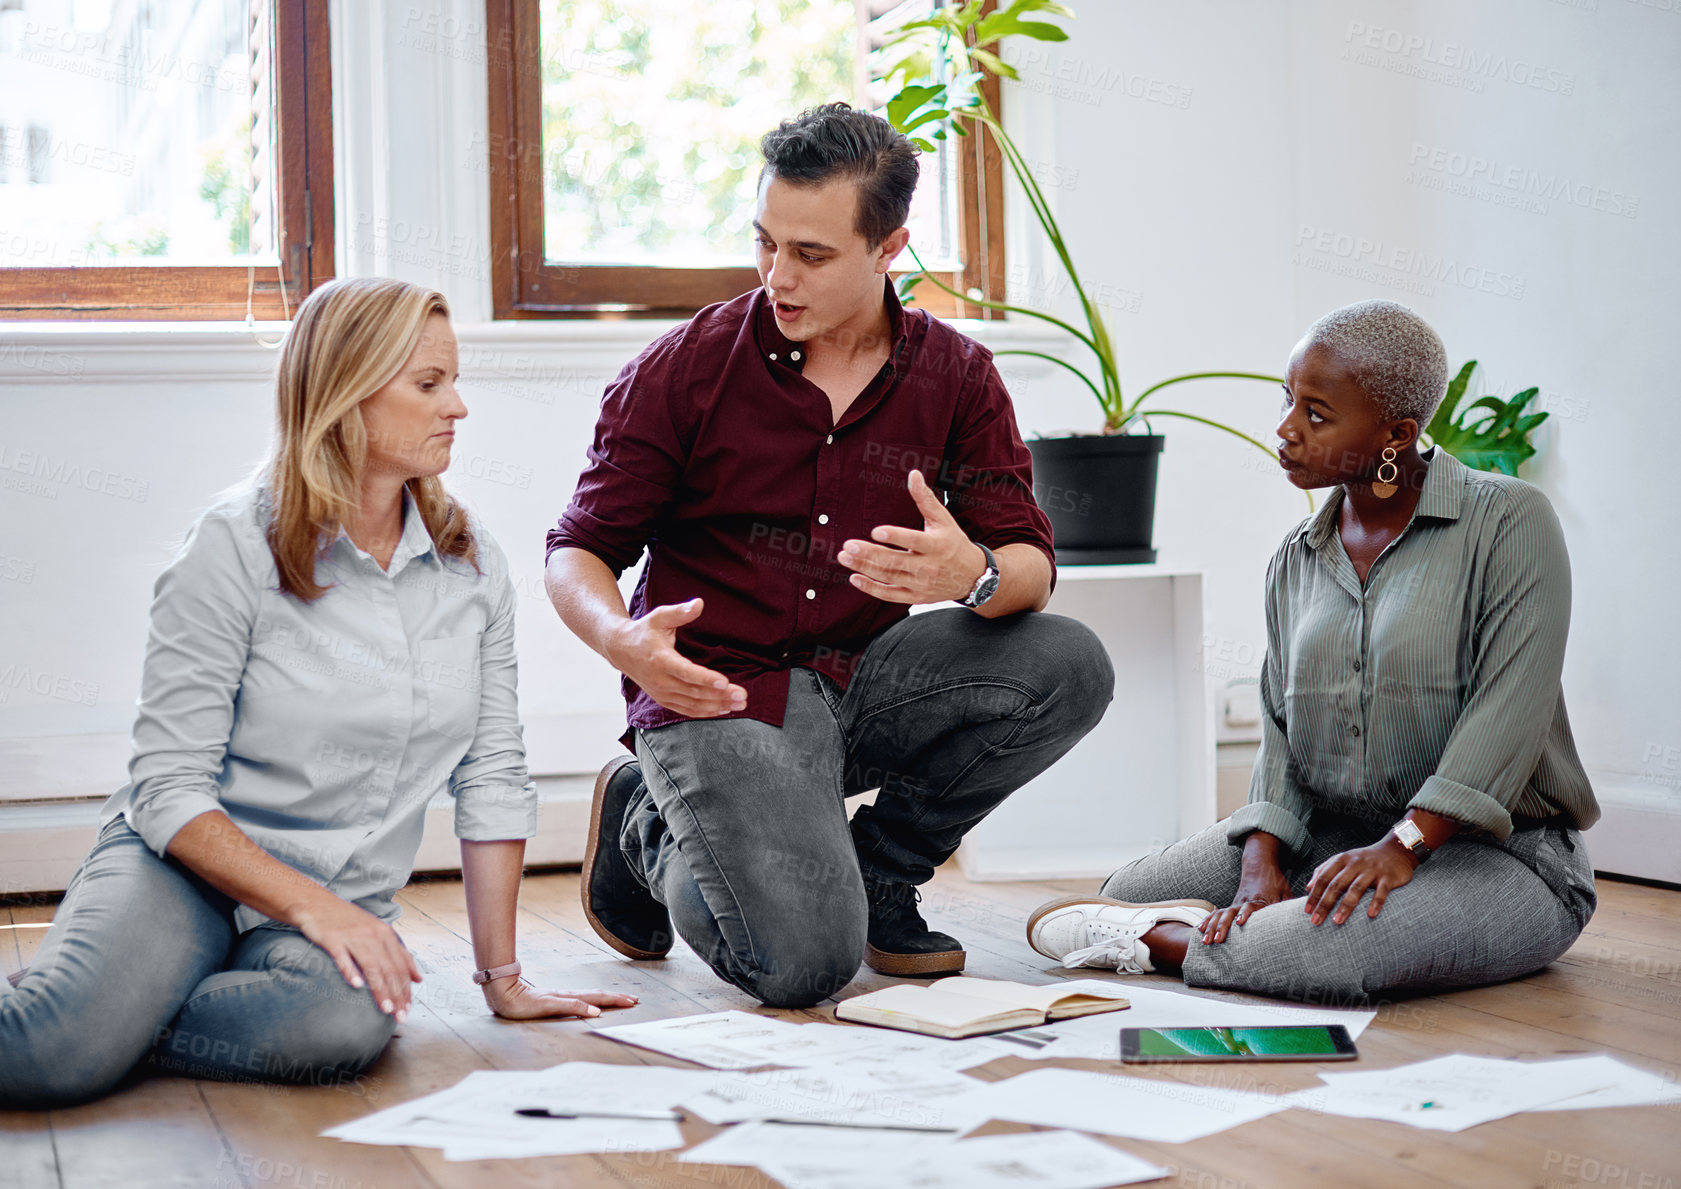 Buy stock photo Shot of a group of businesspeople brainstorming with notes on a floor in an office